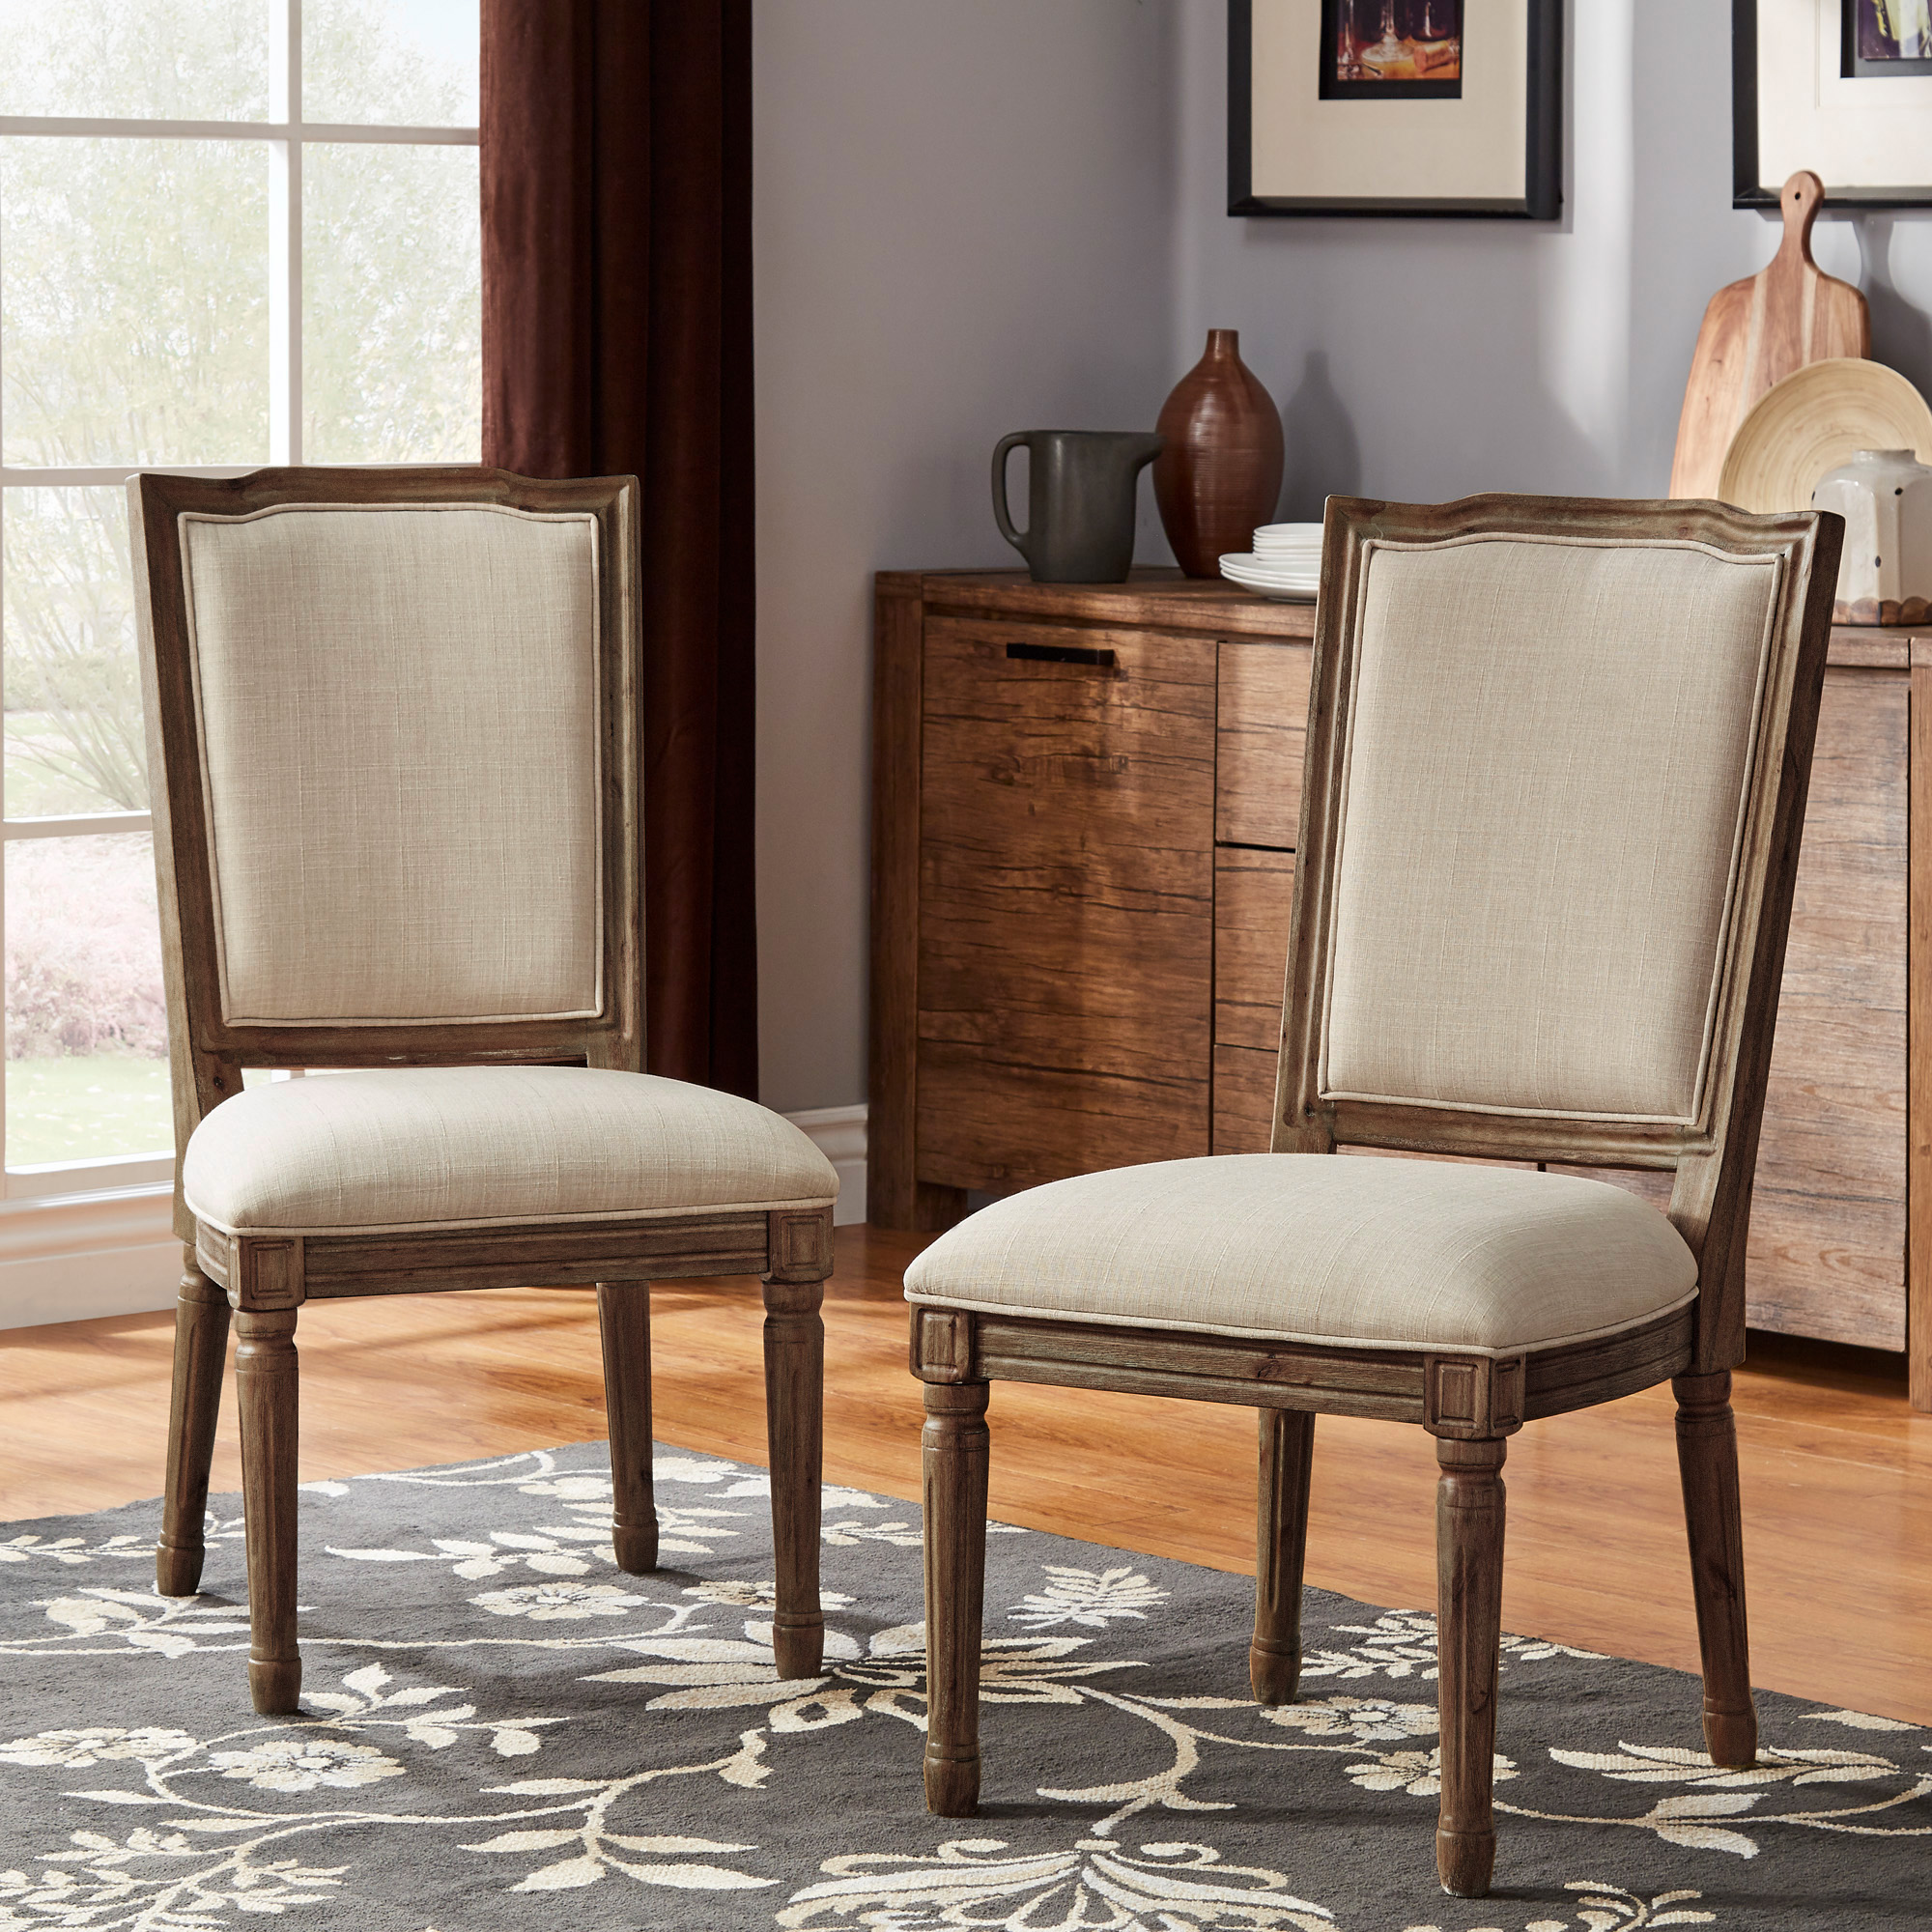 Ornate Linen and Wood Dining Chairs (Set of 2)